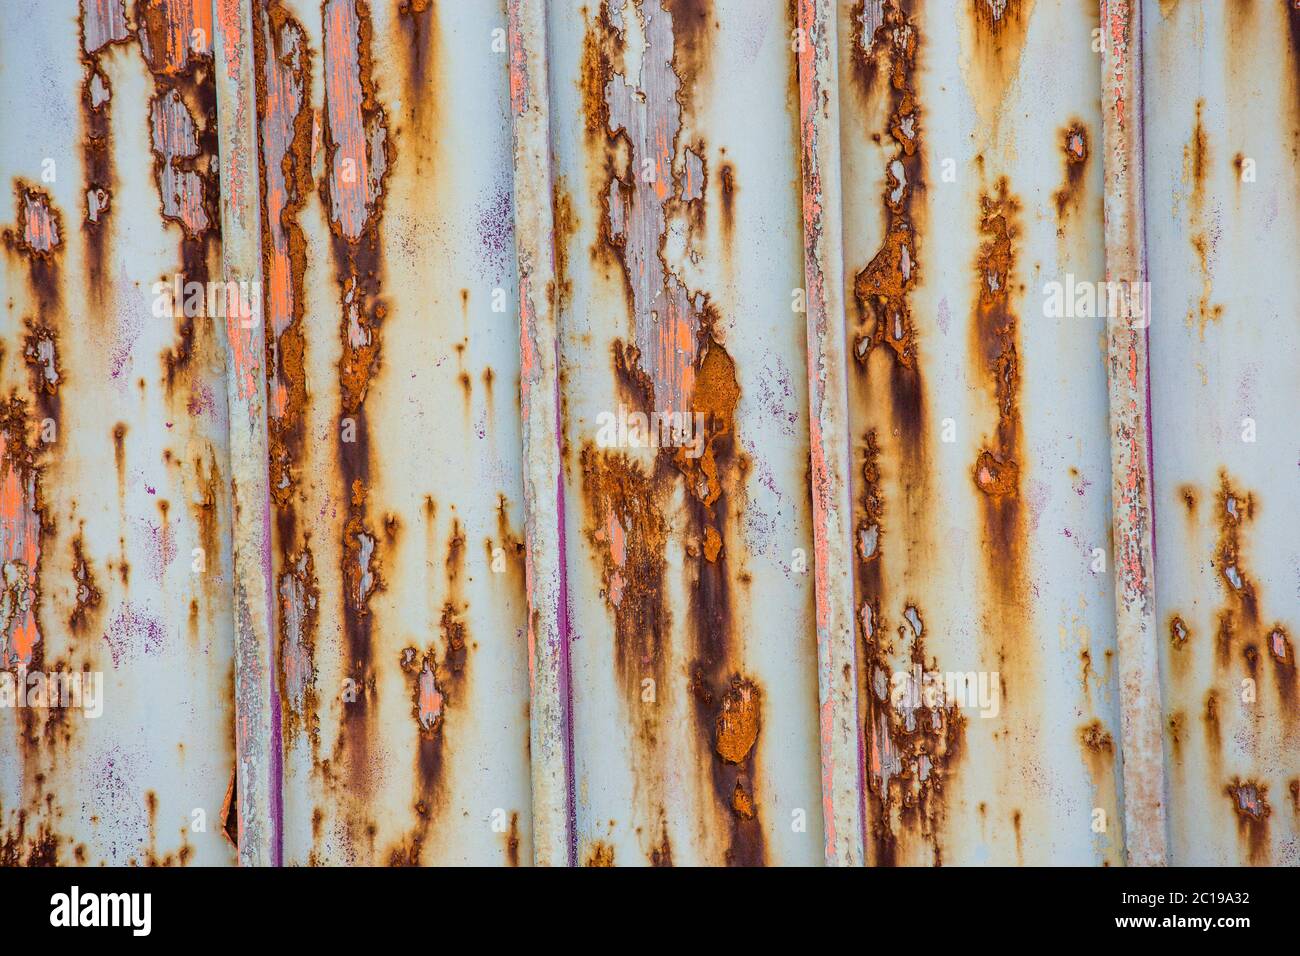 Brown rusty texture of metal gate. Stock Photo